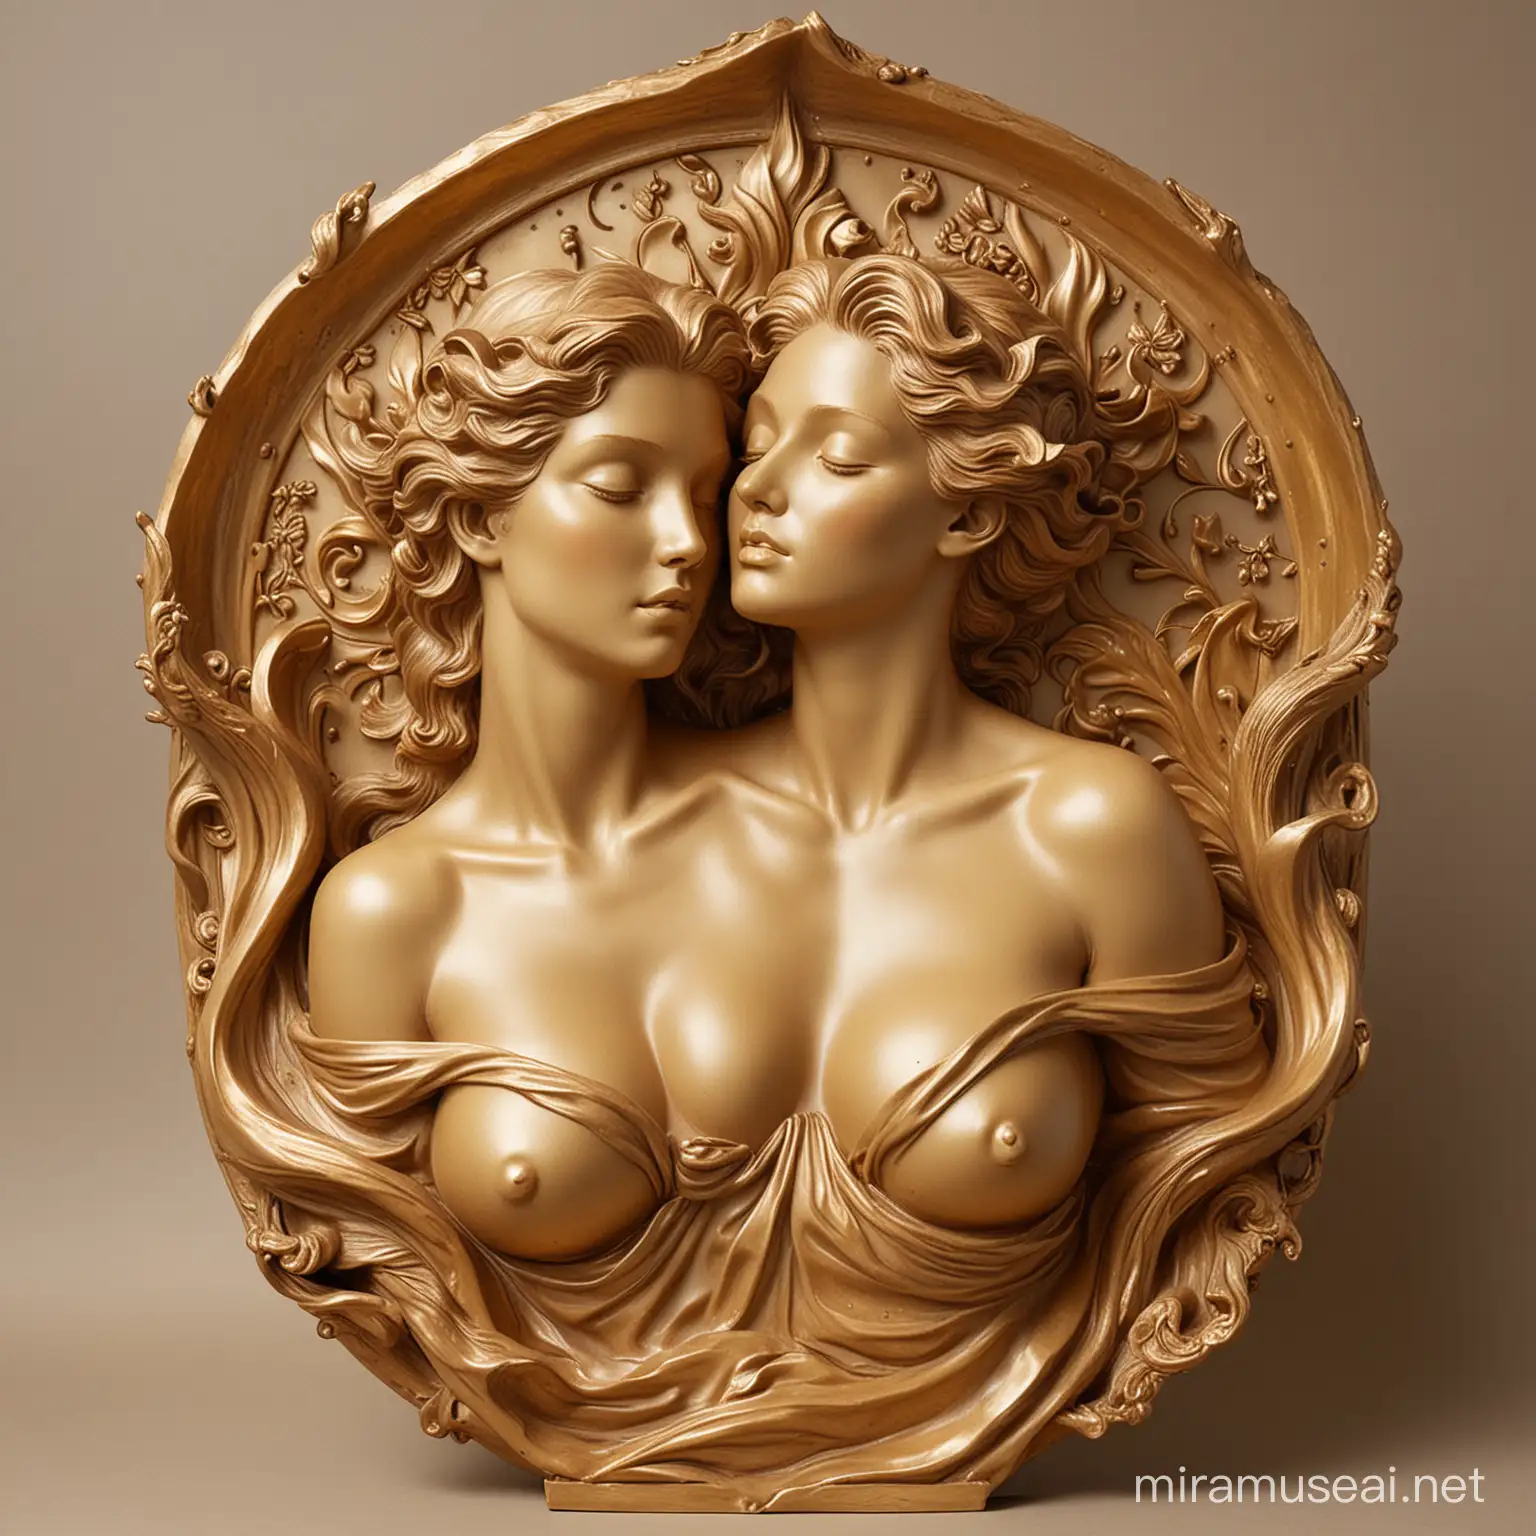 busto with sensual figures and a flame in gold tones in between